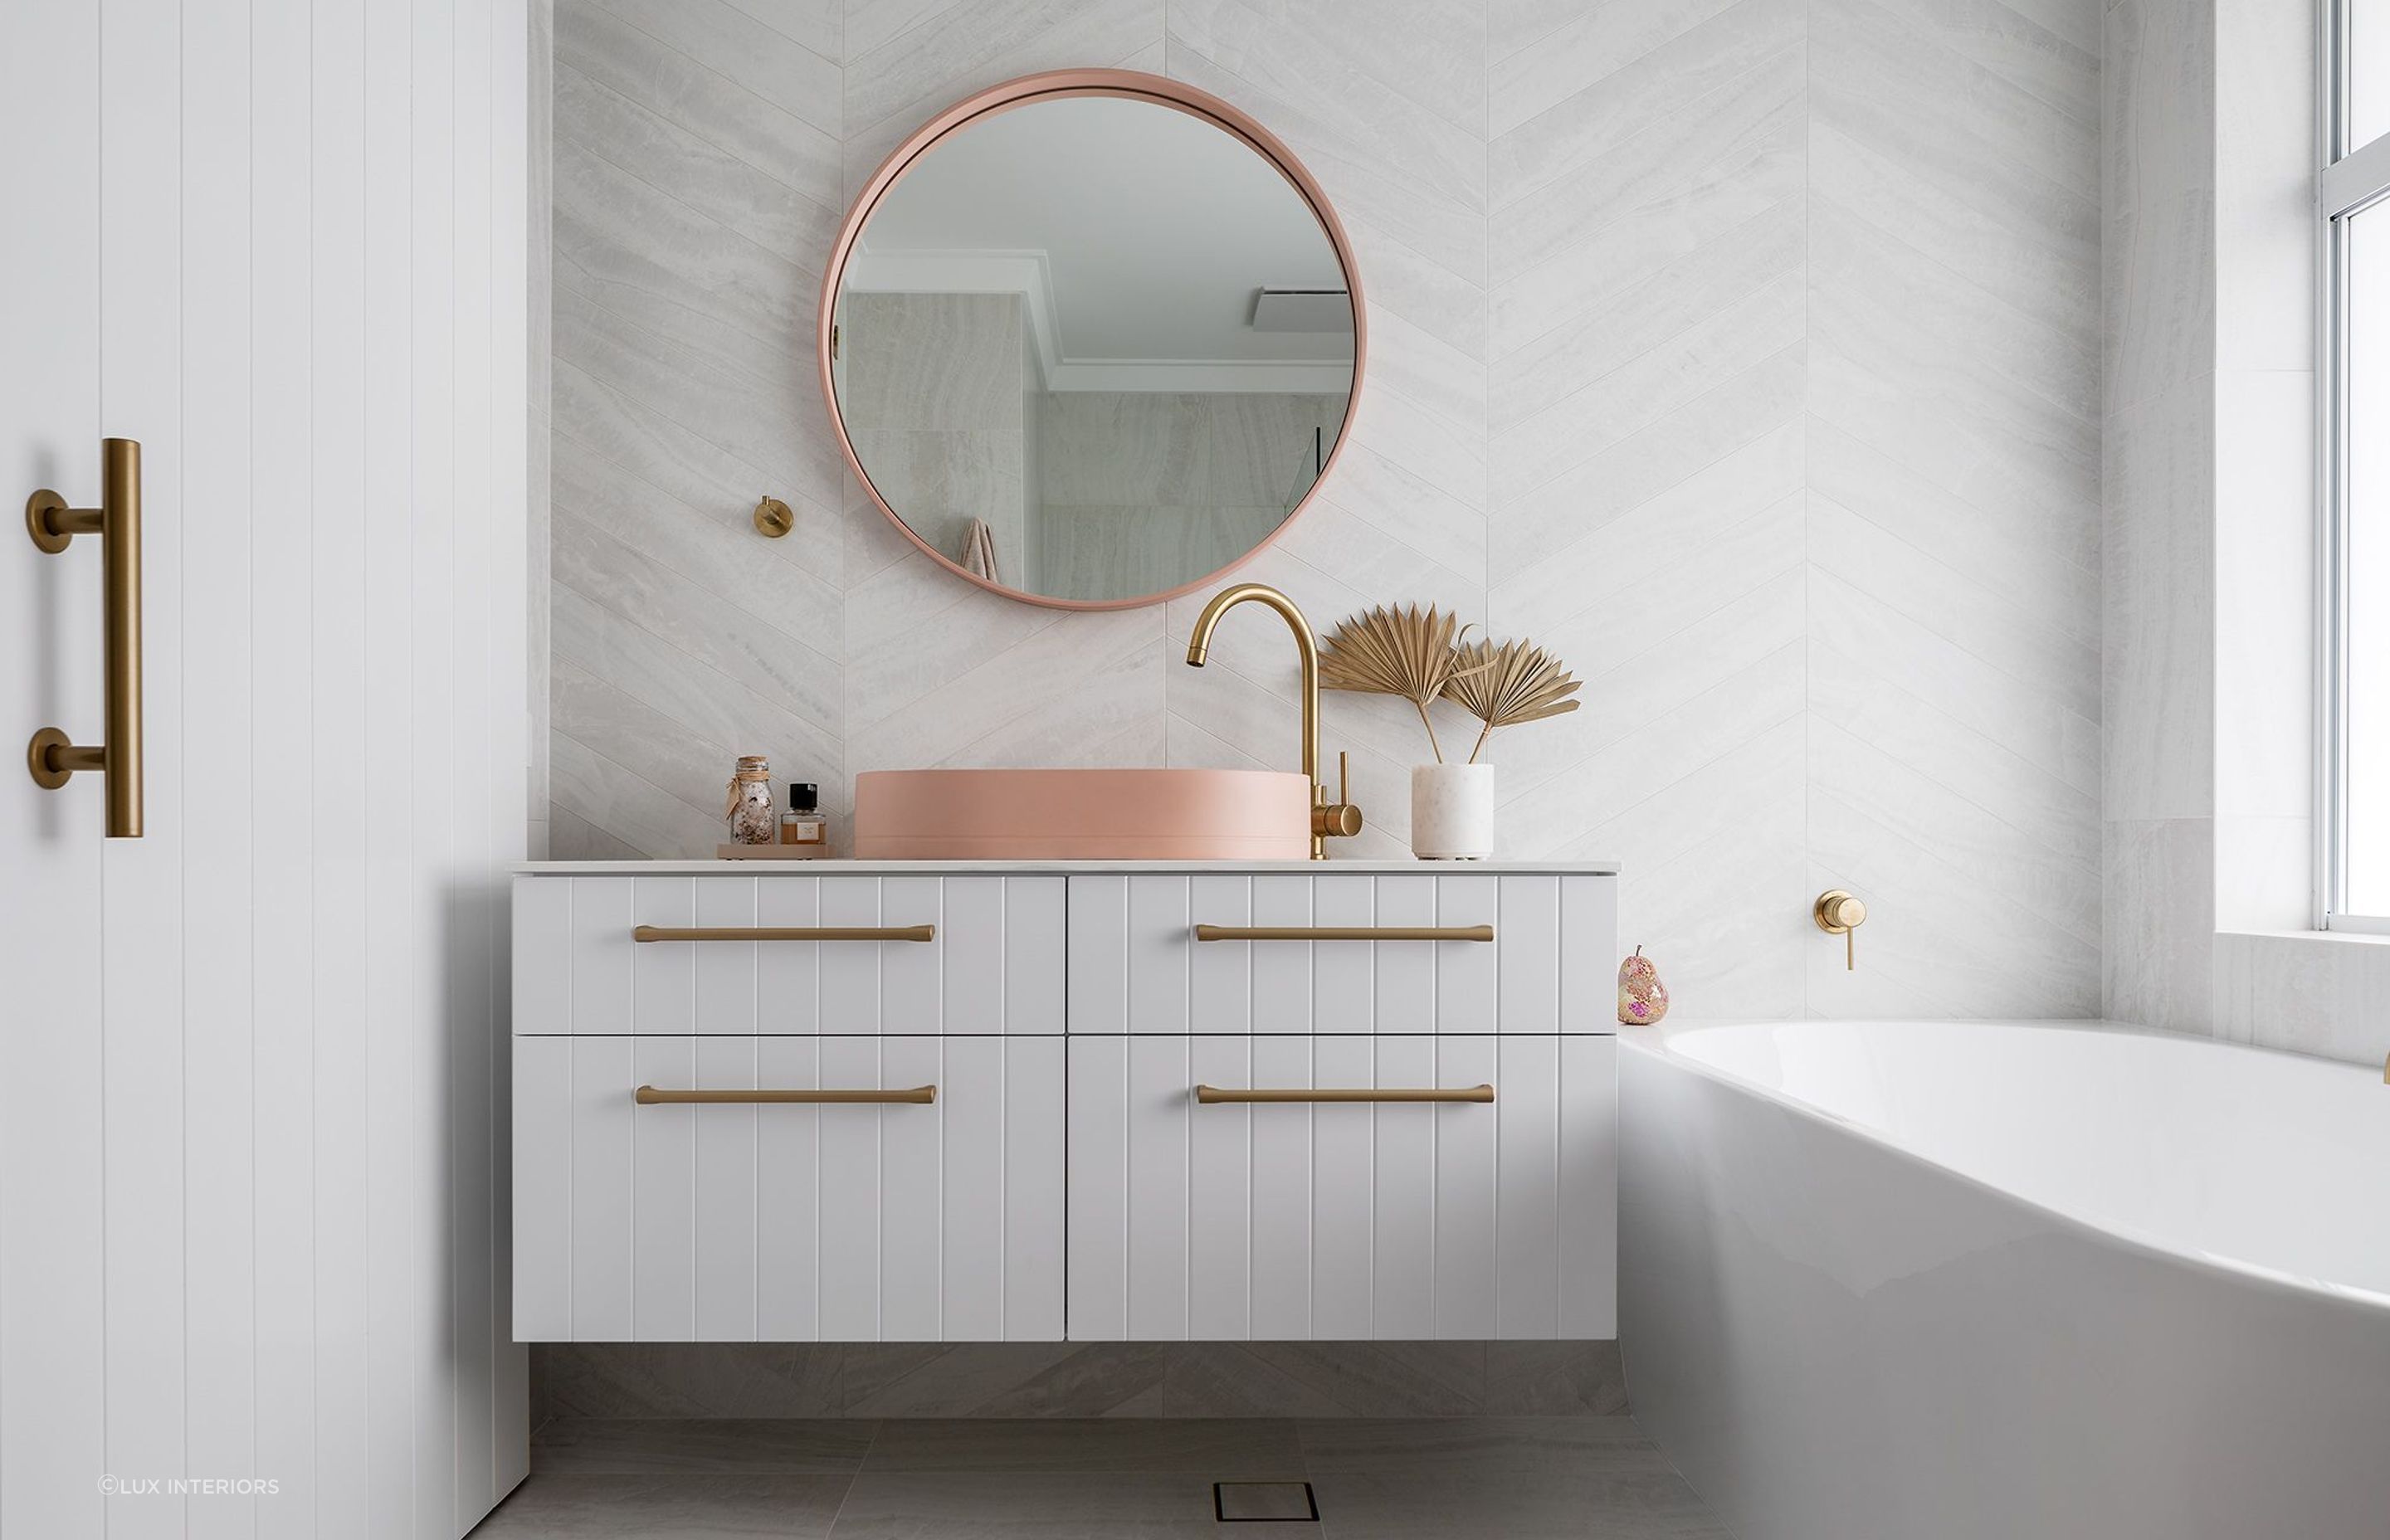 Matching the material and style of your bathroom mirror and sink creates a uniform look. Featured project: Sholl Project - Bathroom